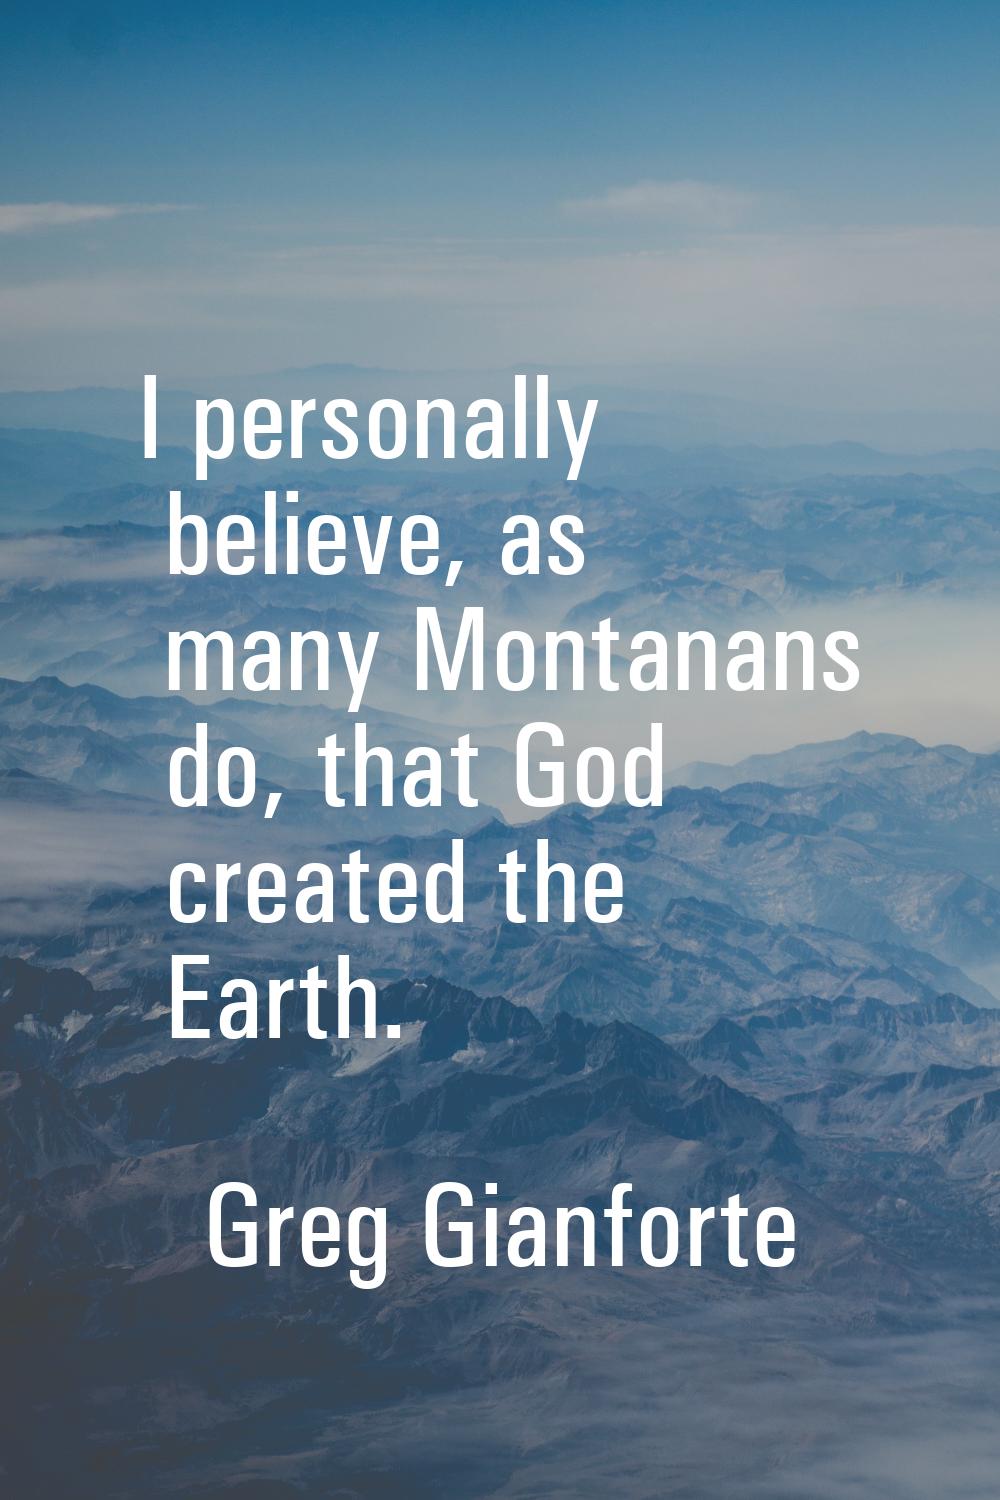 I personally believe, as many Montanans do, that God created the Earth.